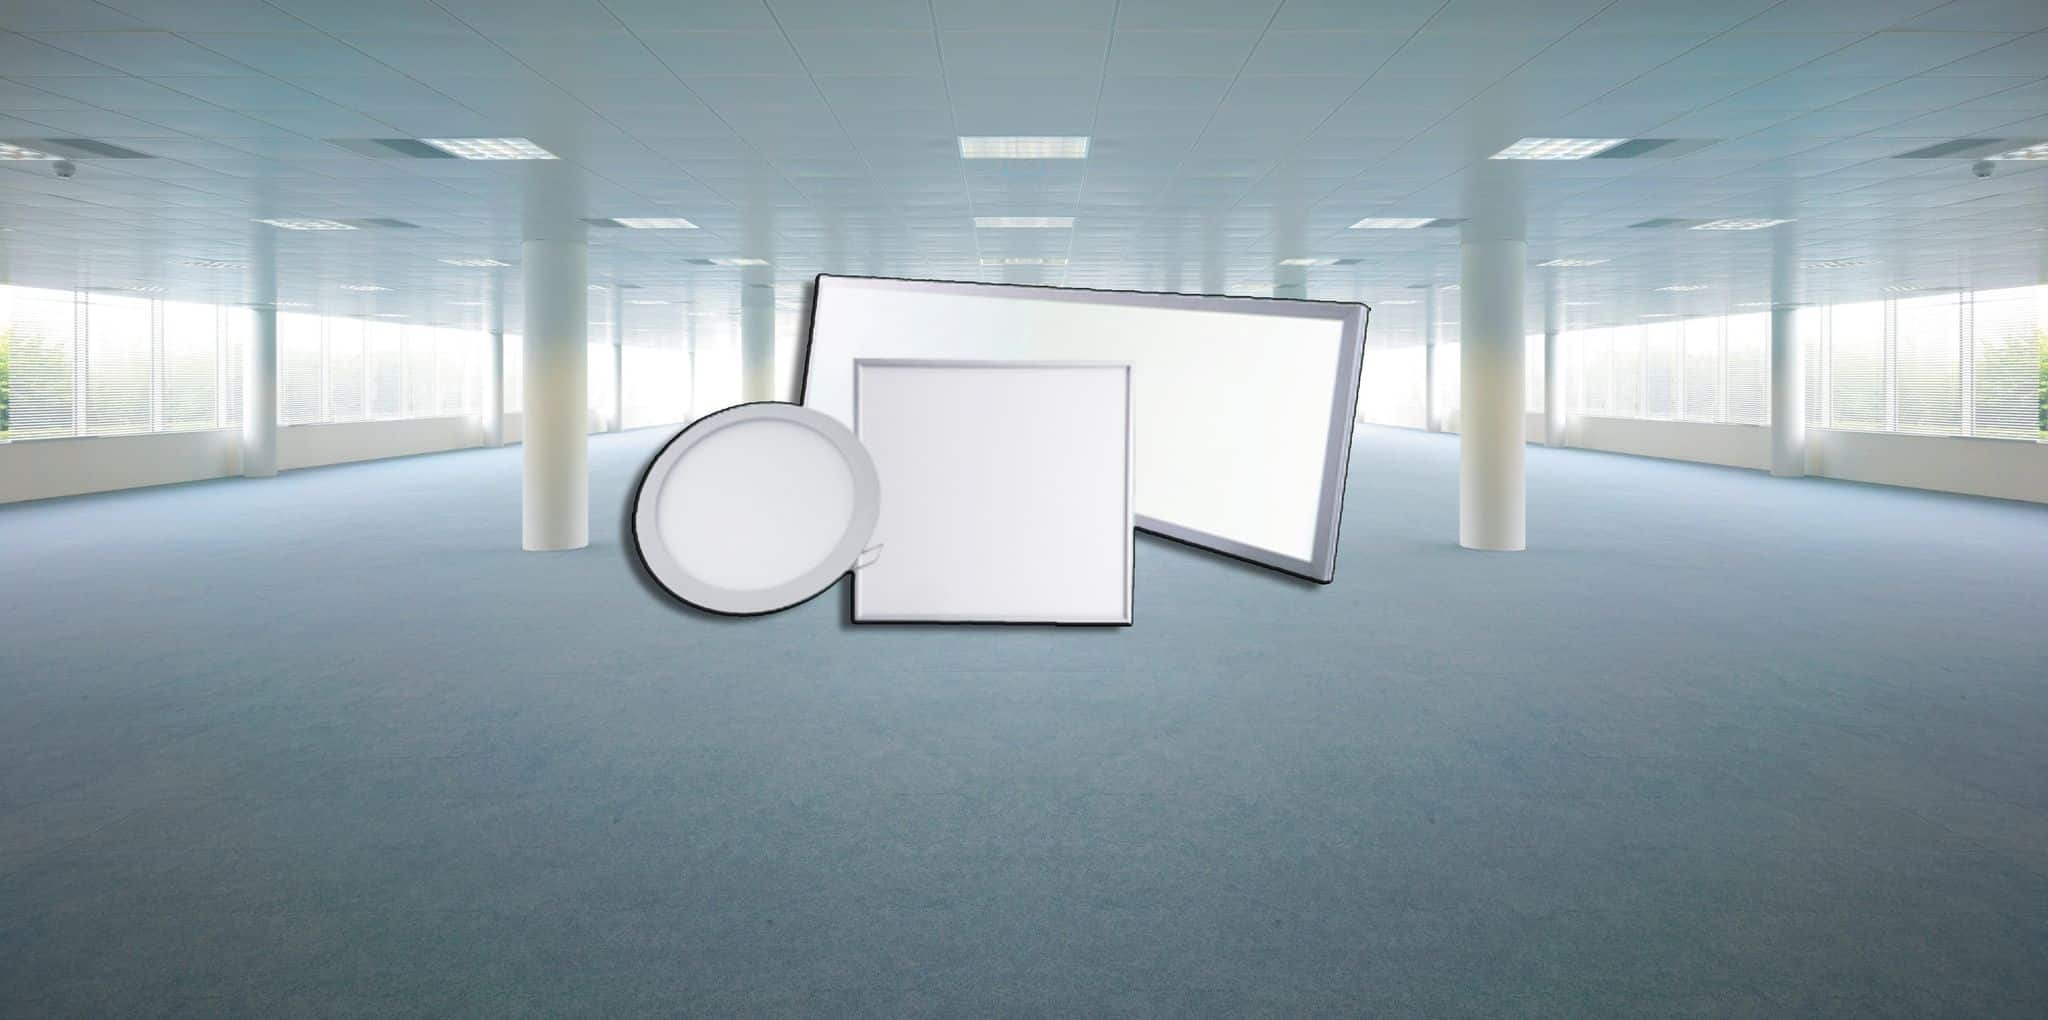 What Are The Benefits Of Using LED Panel Lights?